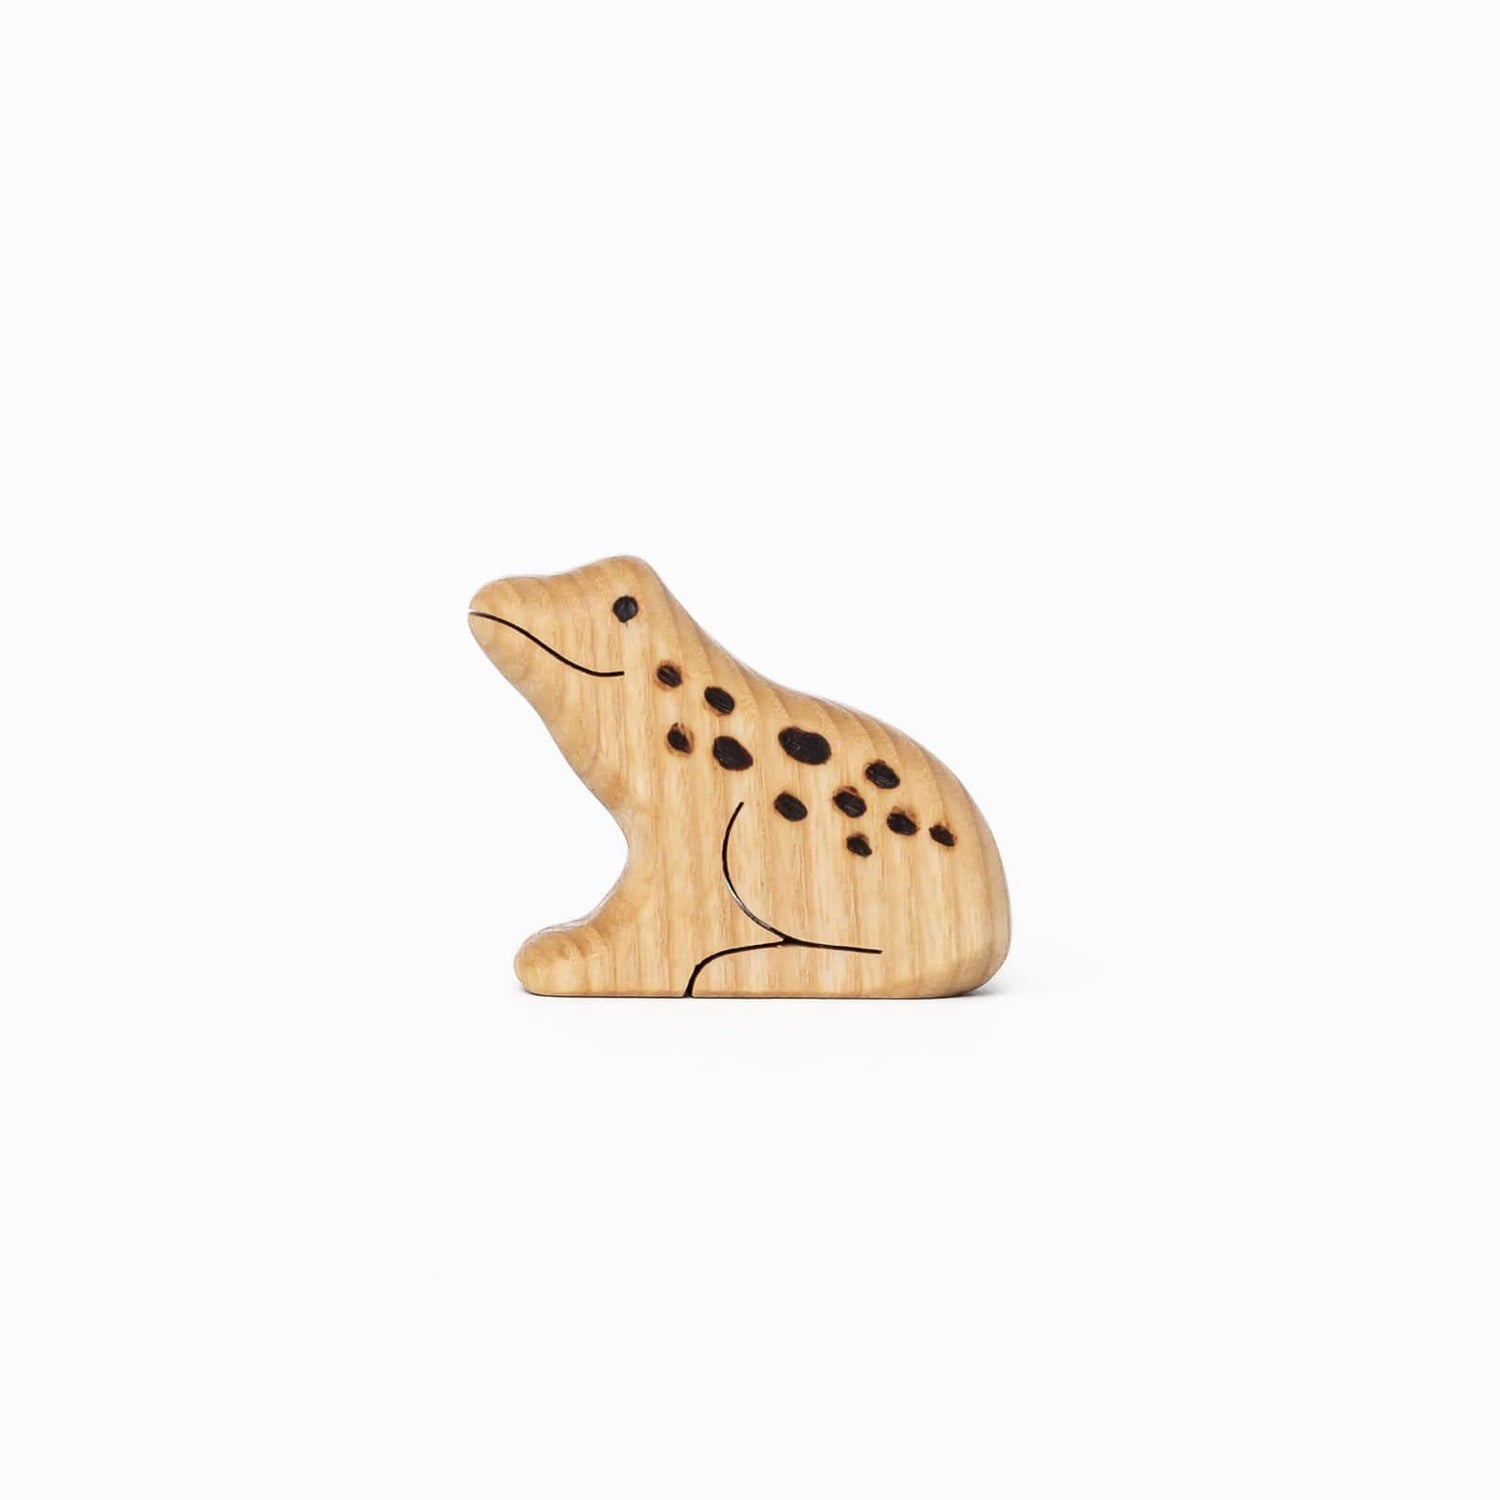 Handmade Wooden Frog Toy – The Playful Peacock